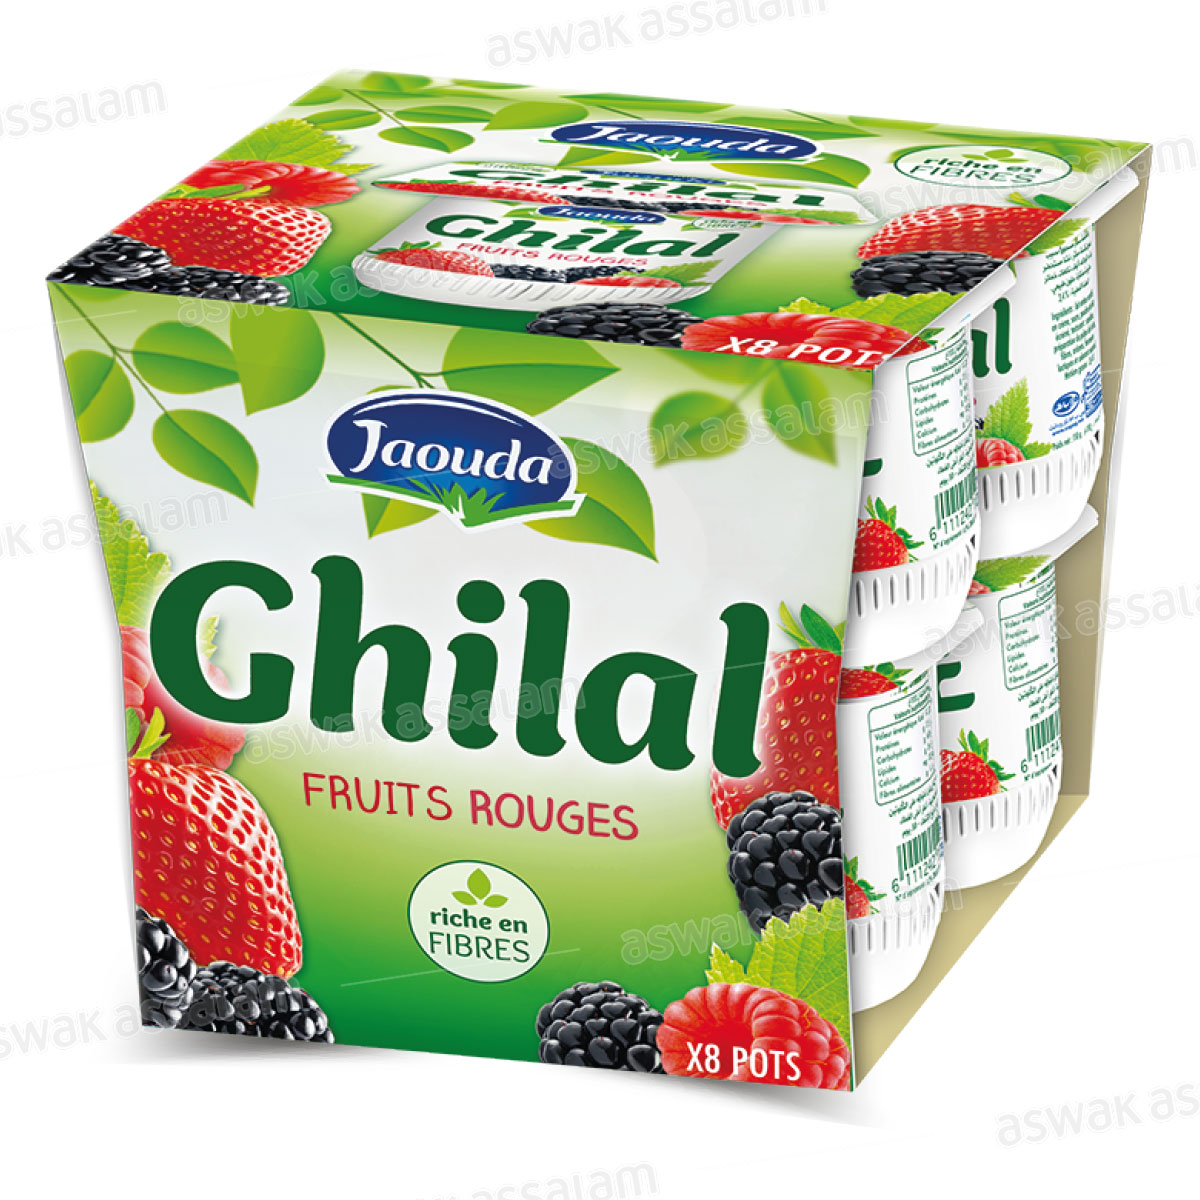 YAOURT GHILAL FRUITS ROUGES 8*110G PACK JAOUDA